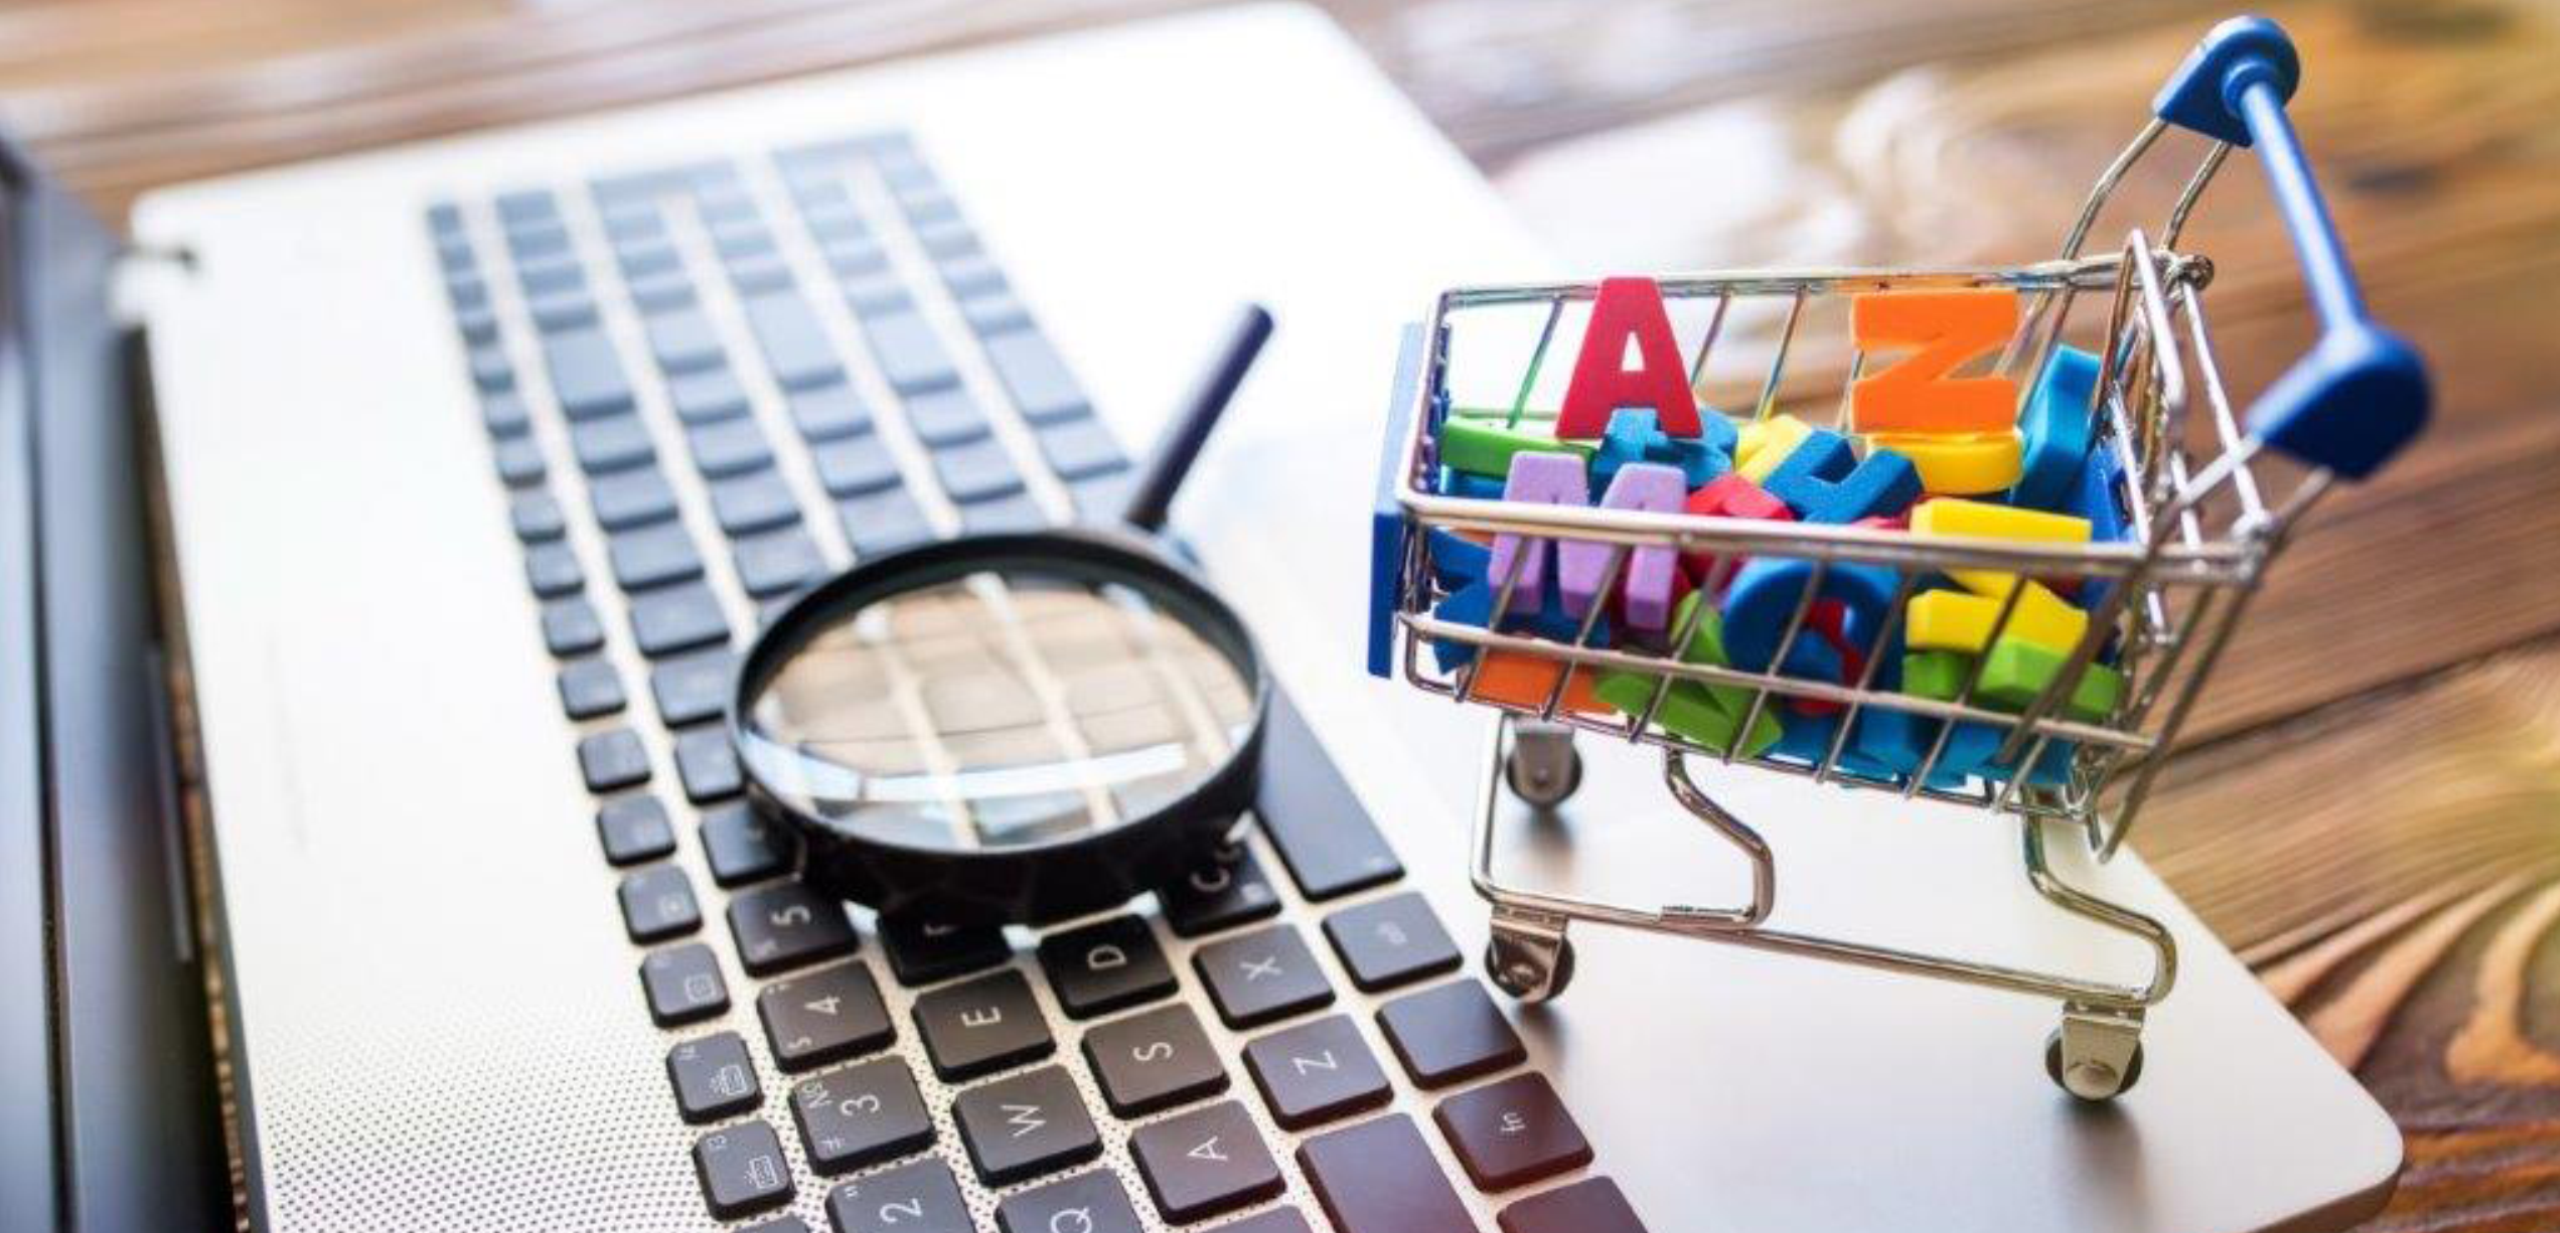 shopping-cart-alphabet-magnifying-glass-search-laptop